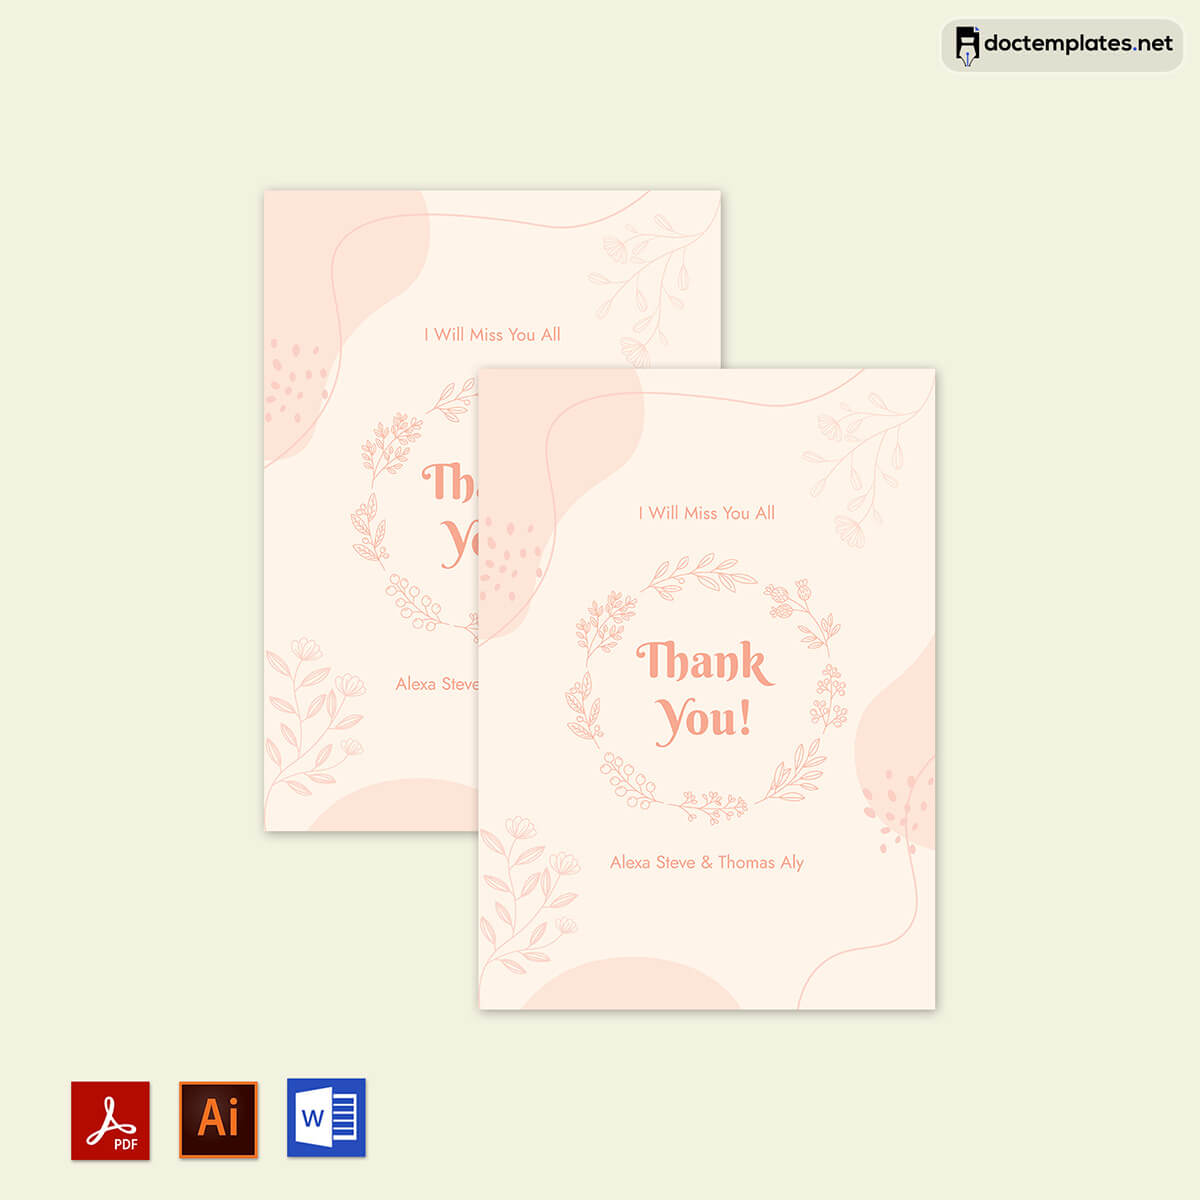 Image of Thank You Card for Business
Thank You Card for Business
